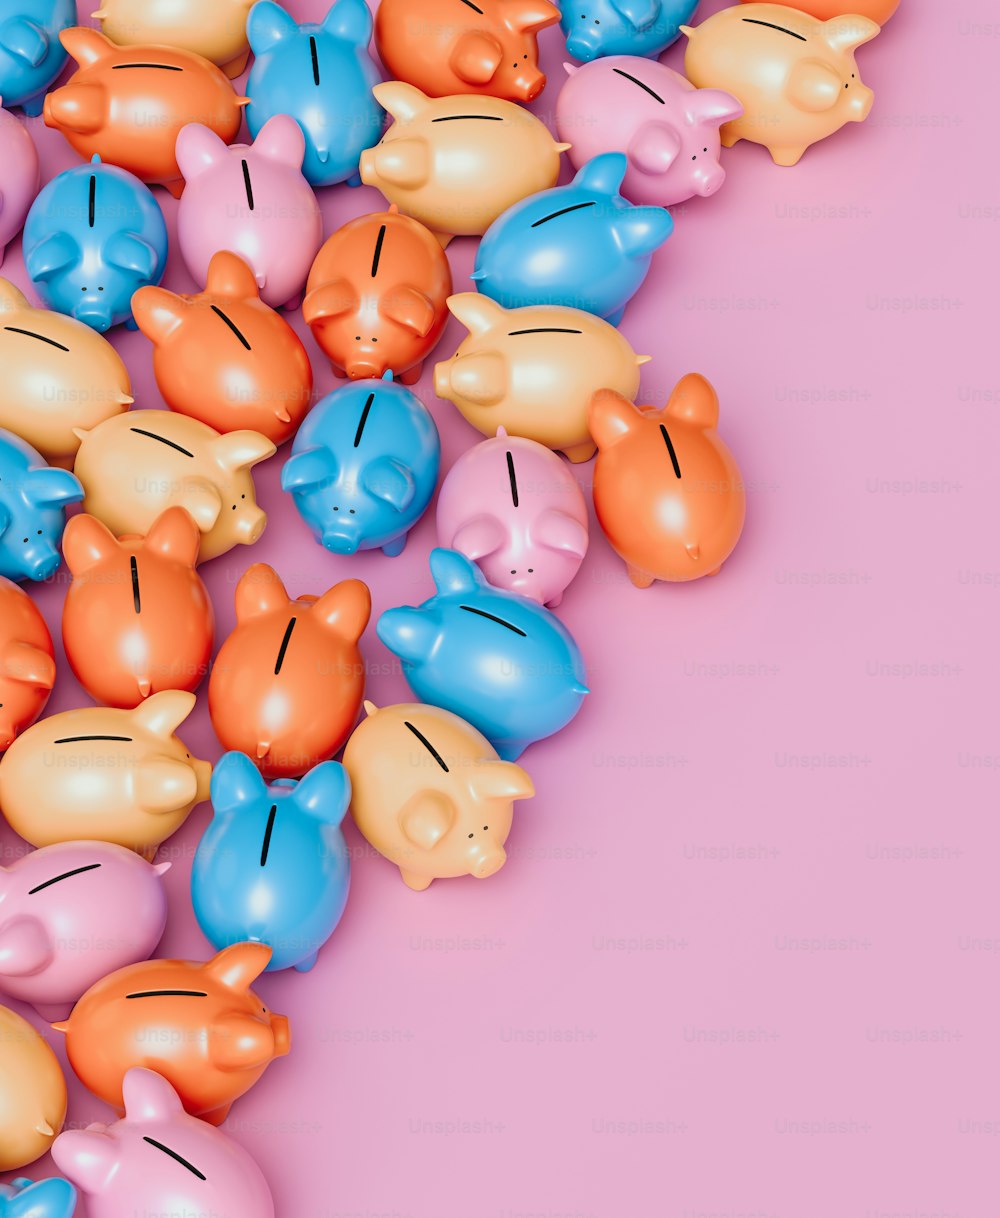 a bunch of small plastic piggy toys on a pink background